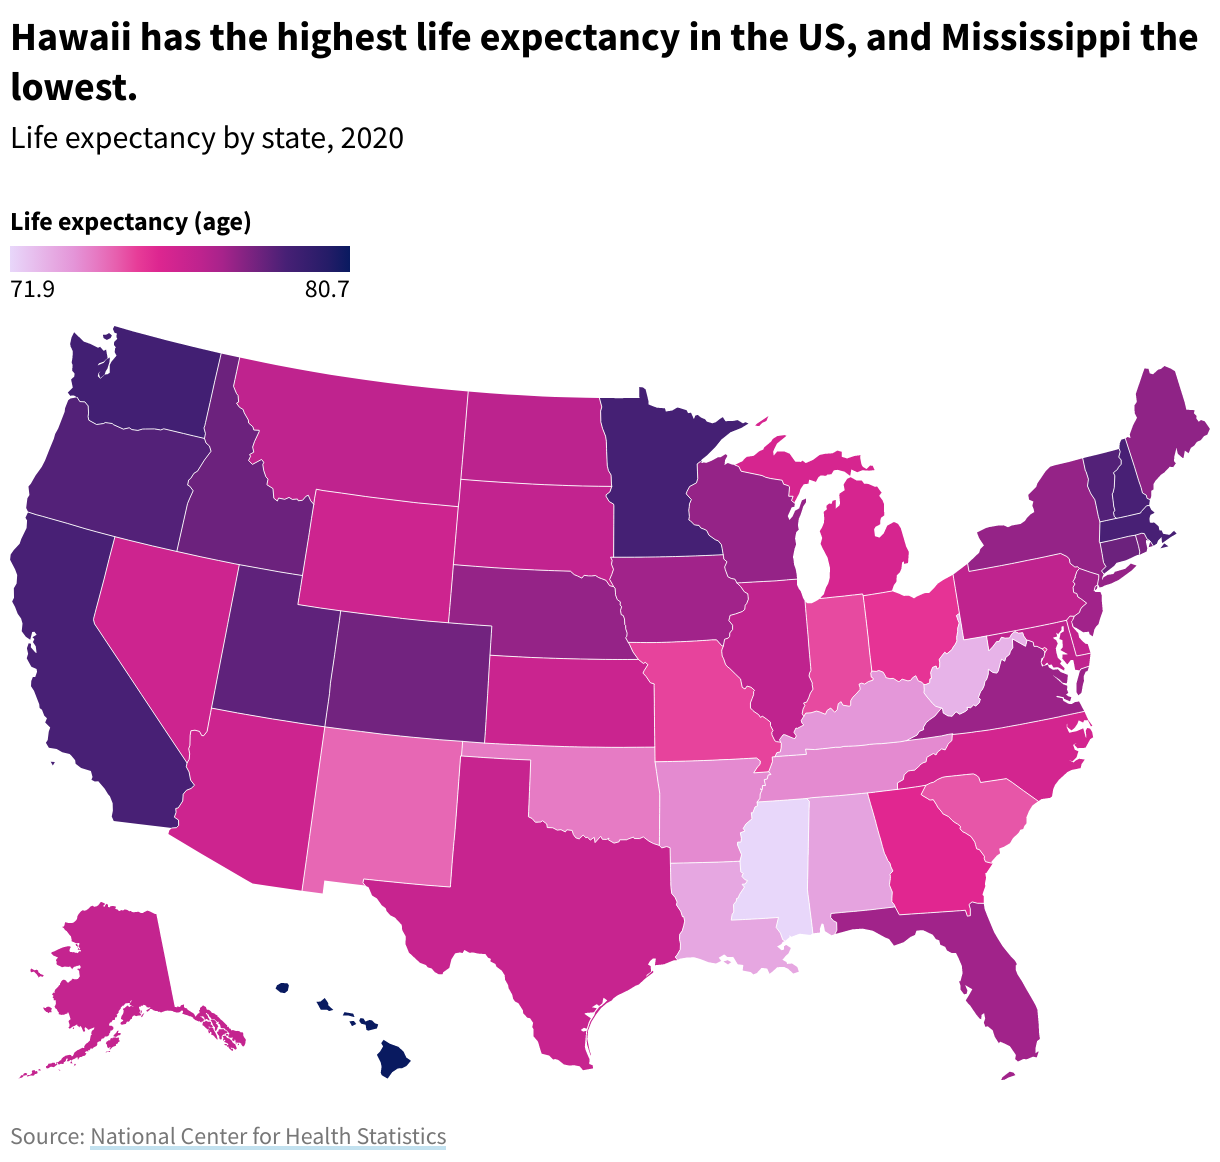 In 2020, Hawaii had the highest life expectancy at 80.7 years. Conversely, Mississippi had the lowest life expectancy at 71.9 years.